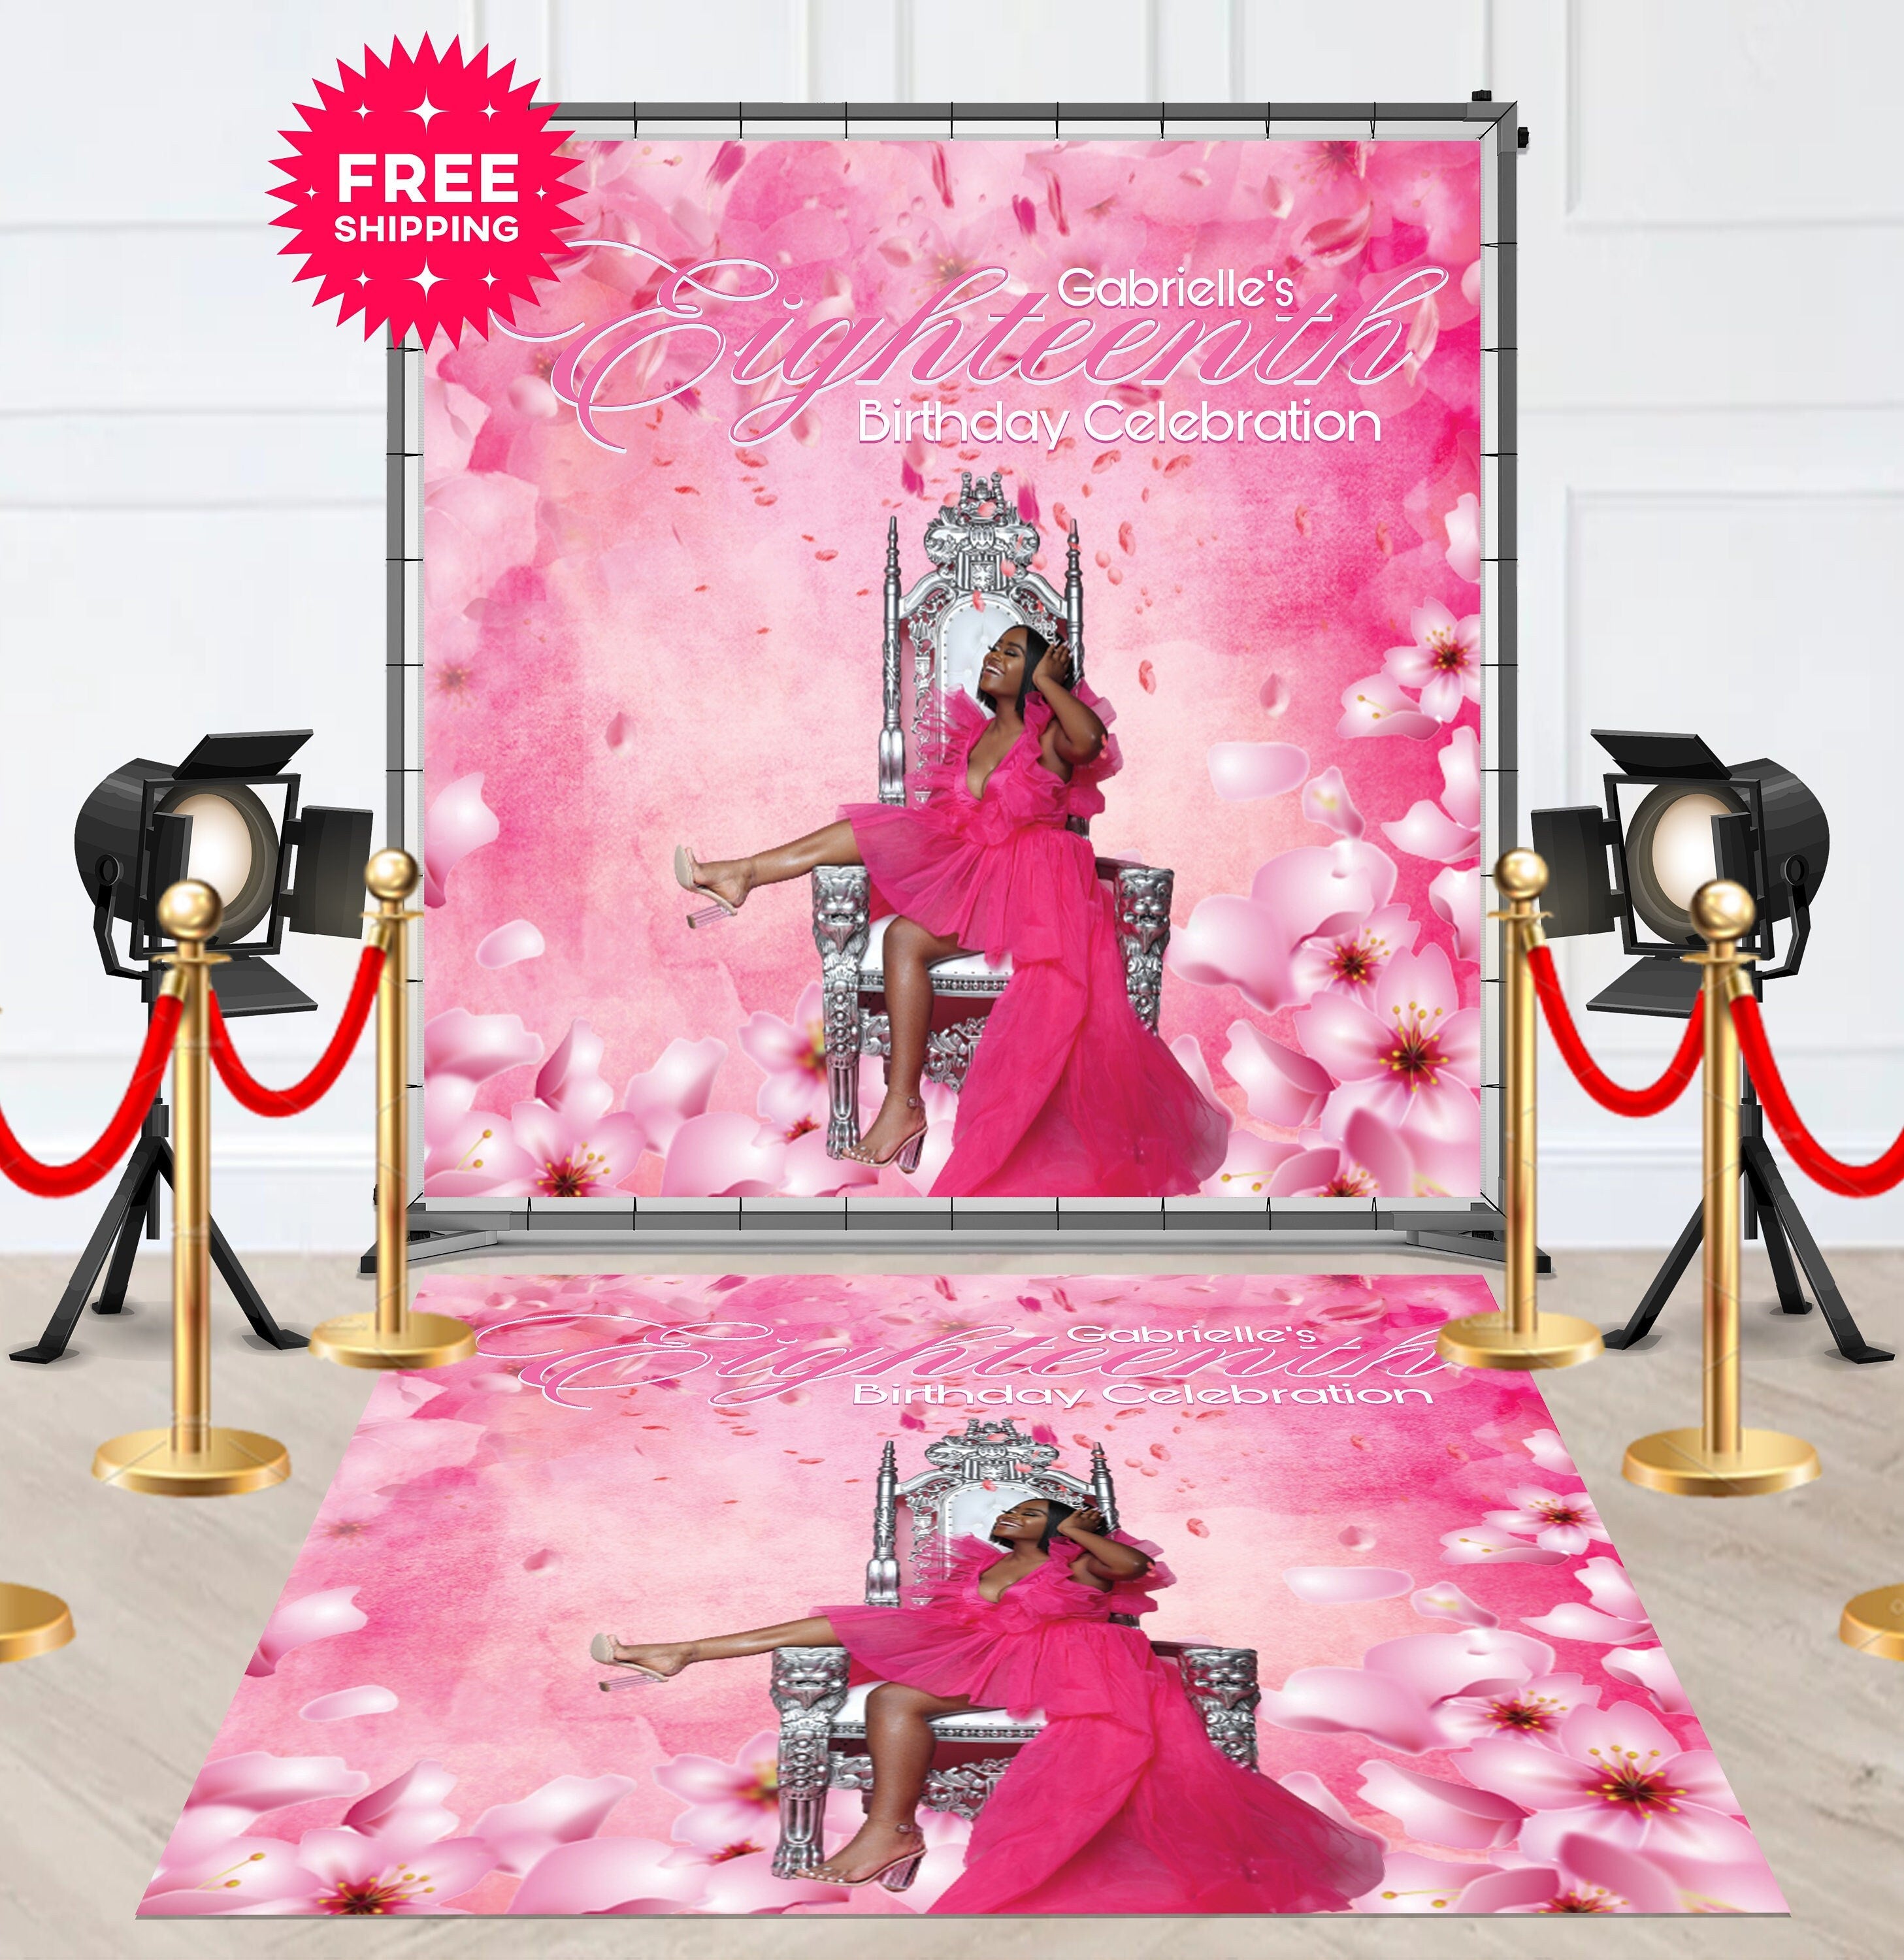 Removable Floor Decal Runner with Hot Pink Flowers and Queen Chair - Hue Design Group